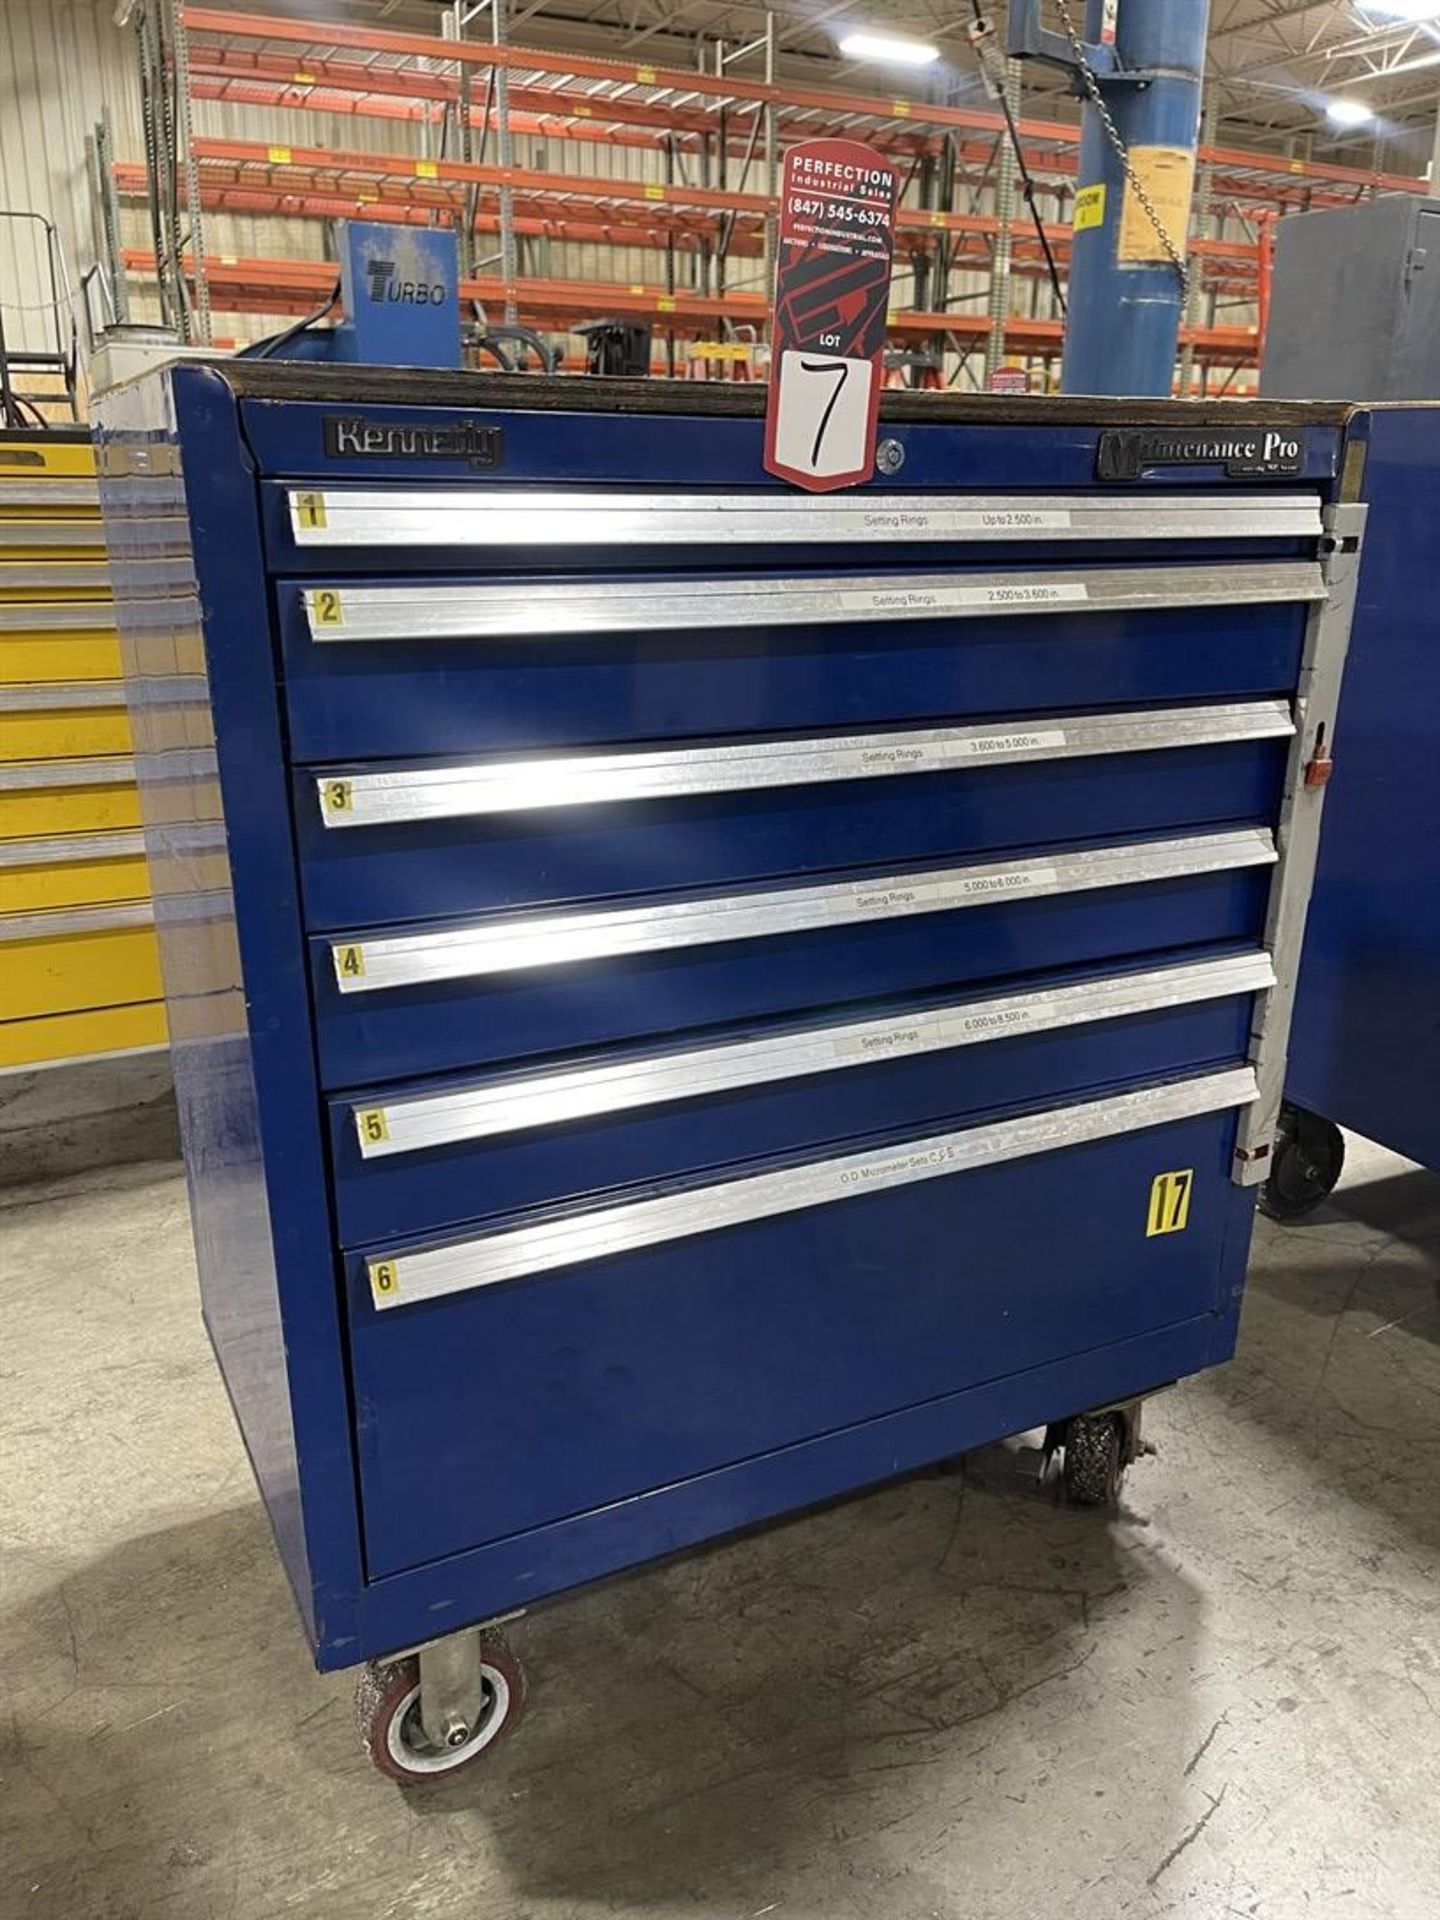 Kennedy Maintenance Pro Rolling Tool Chest